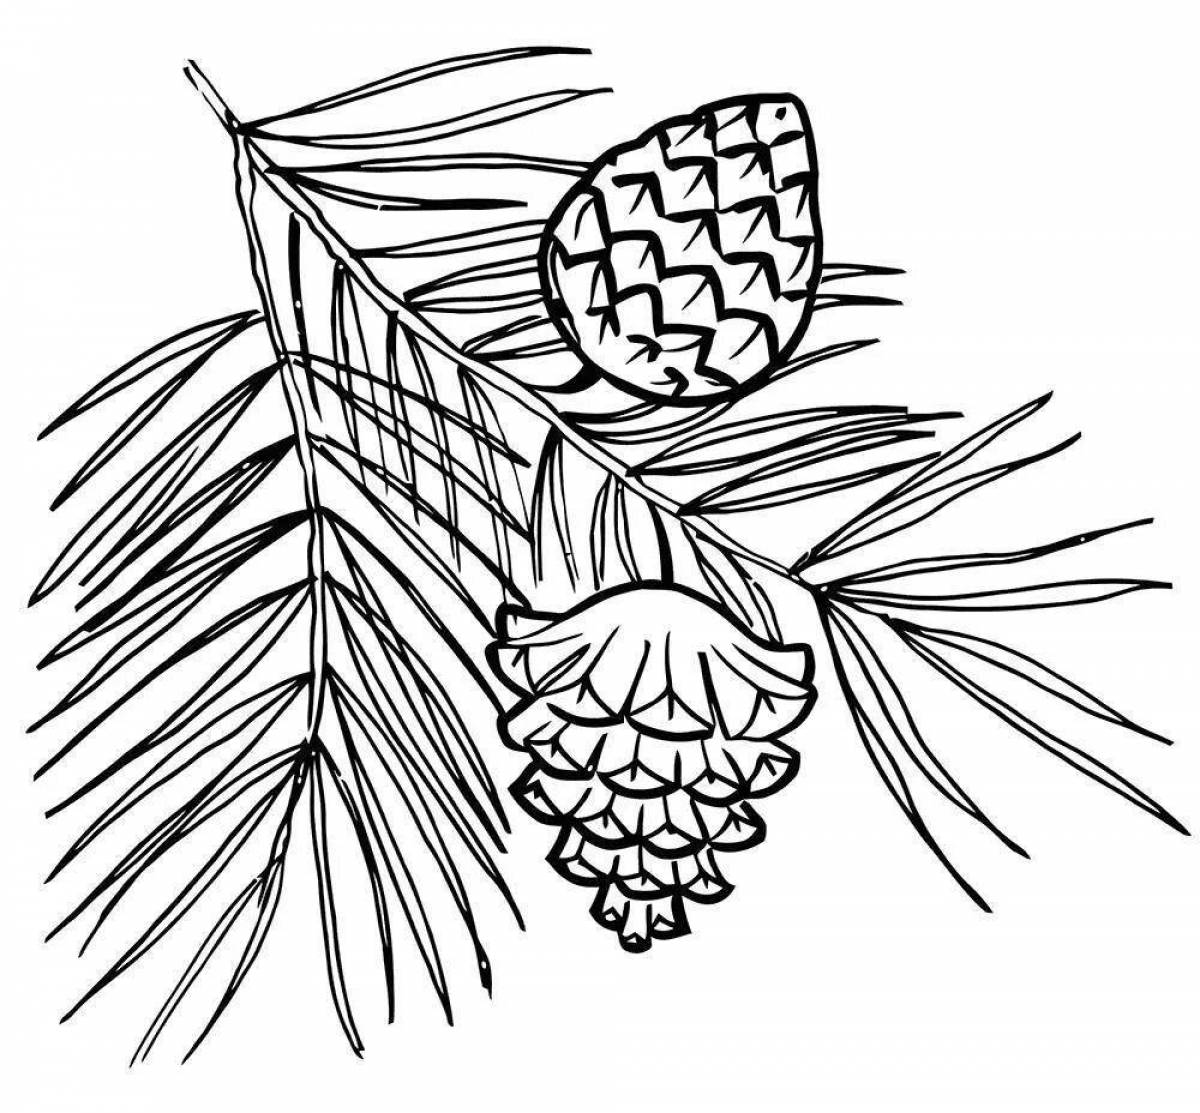 Exquisite spruce branch coloring page